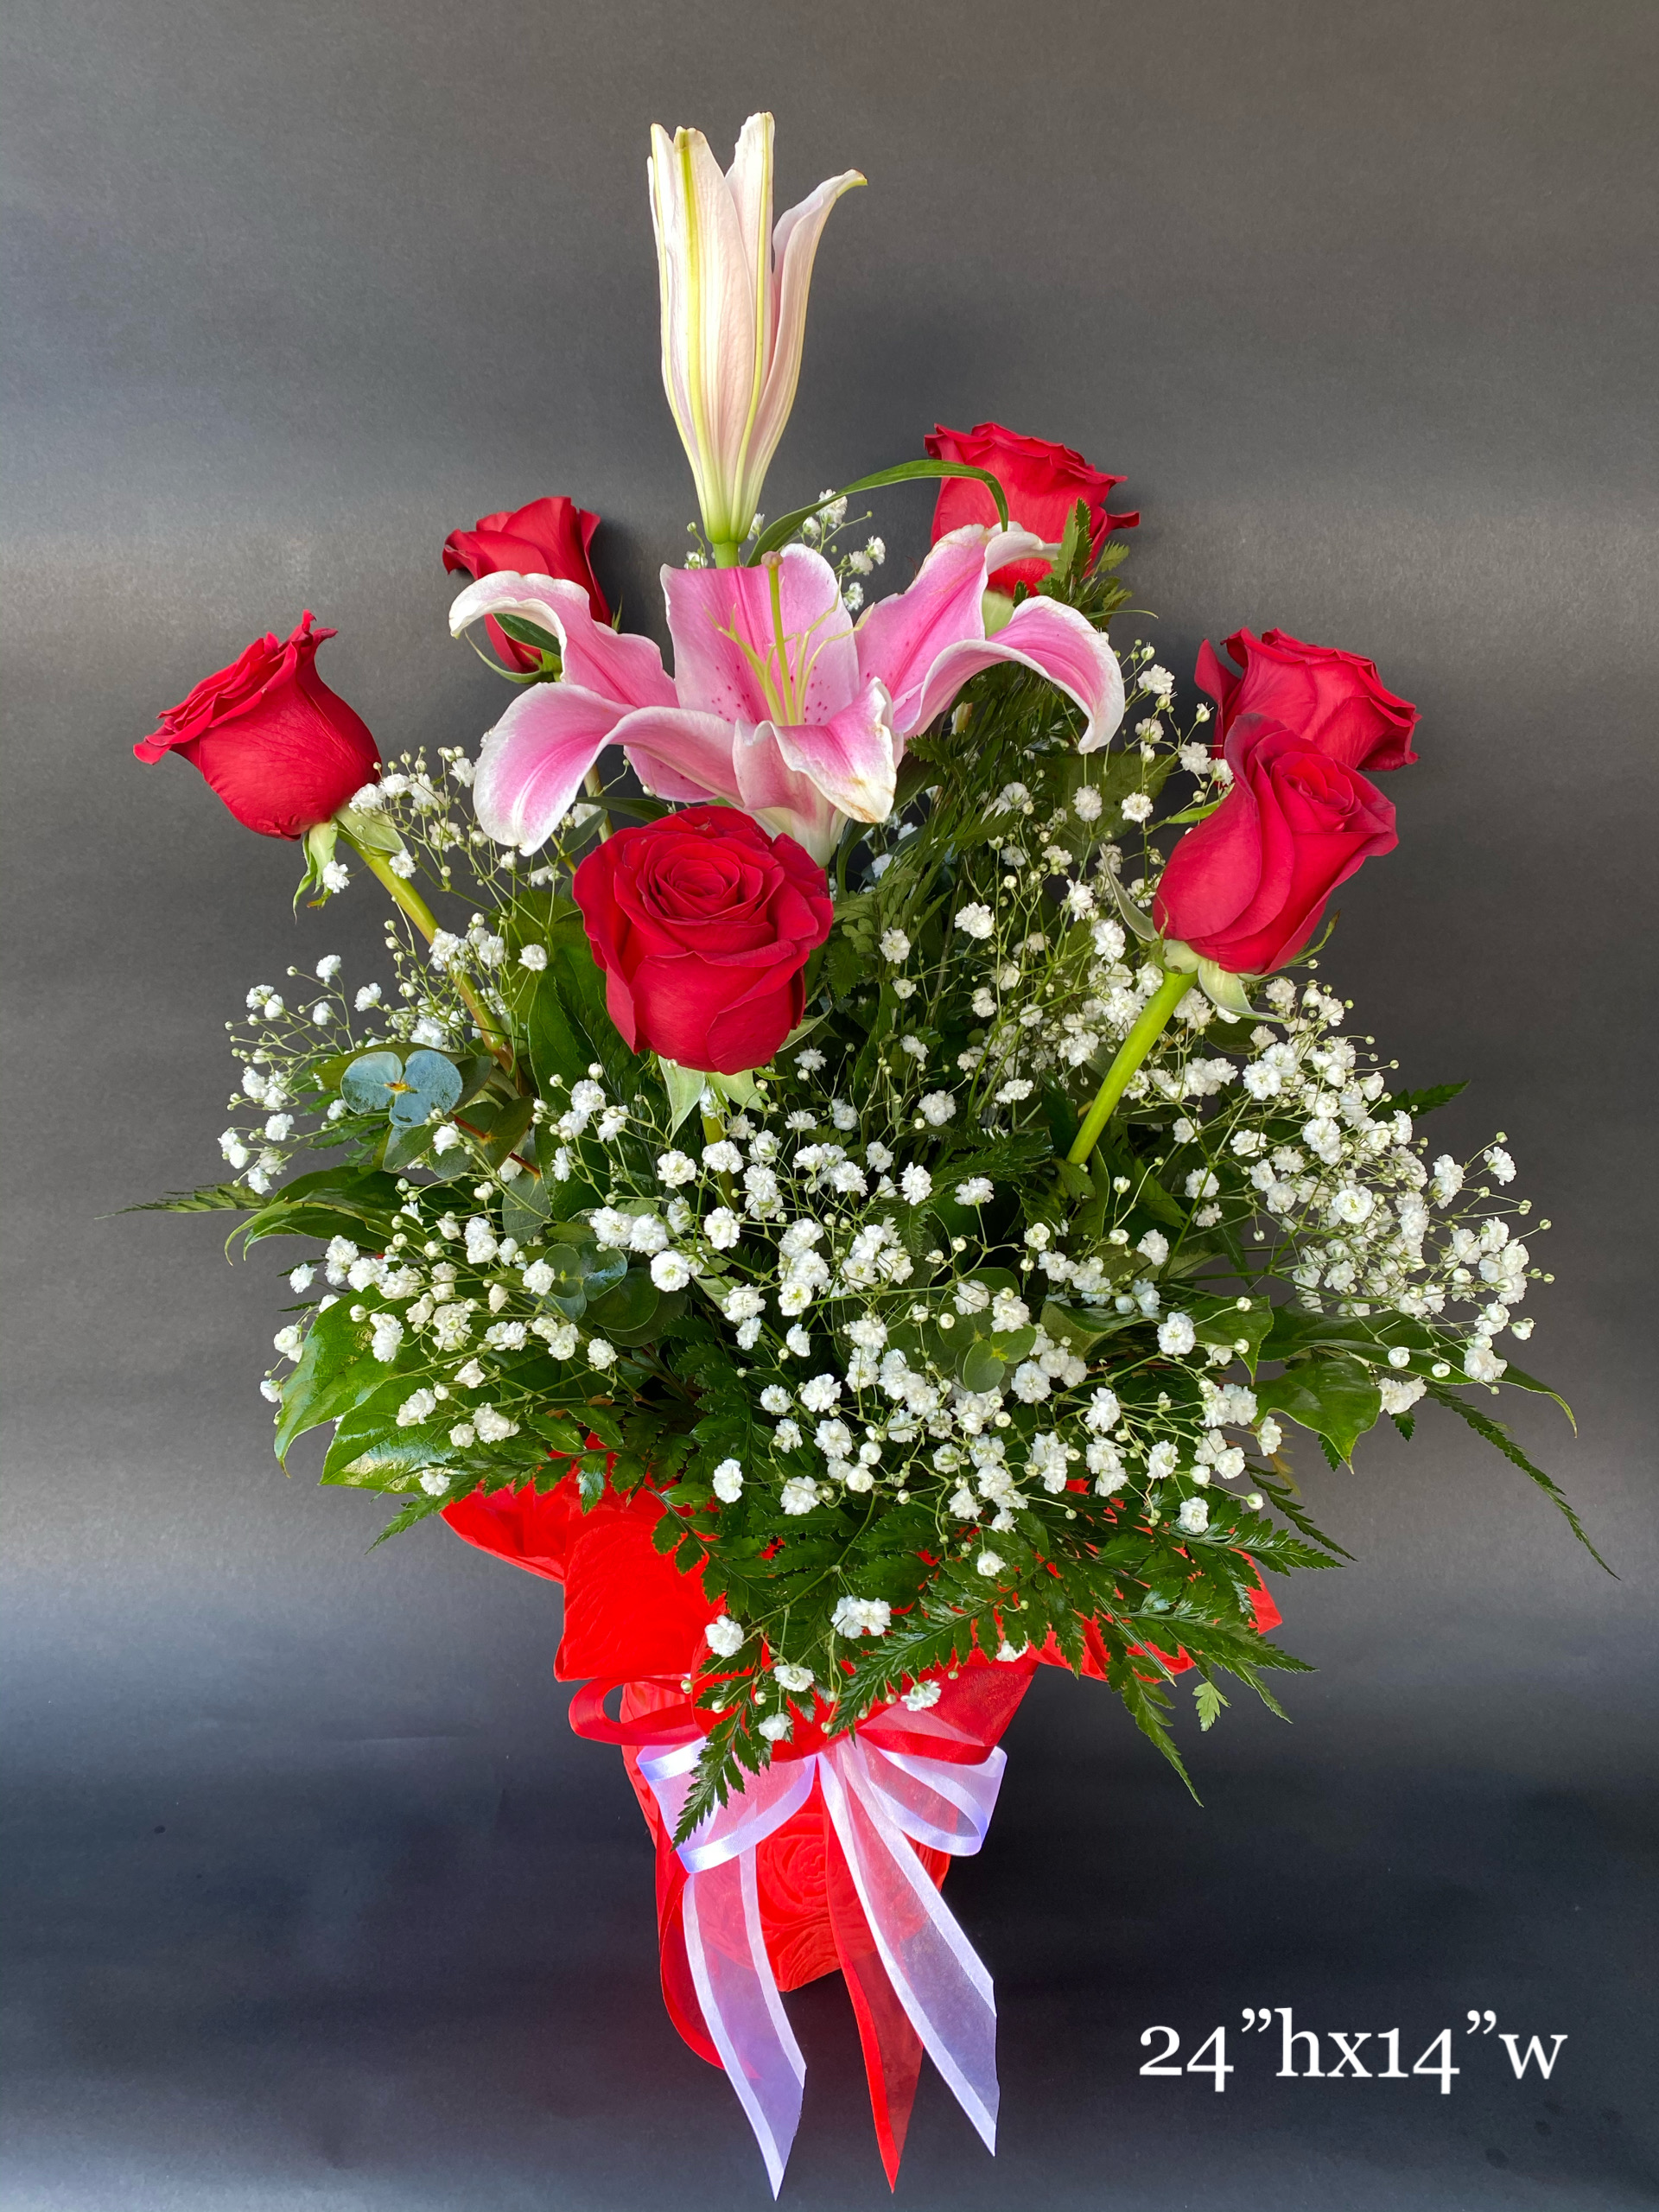 Simply Stunning Roses
$69.99 + Tax